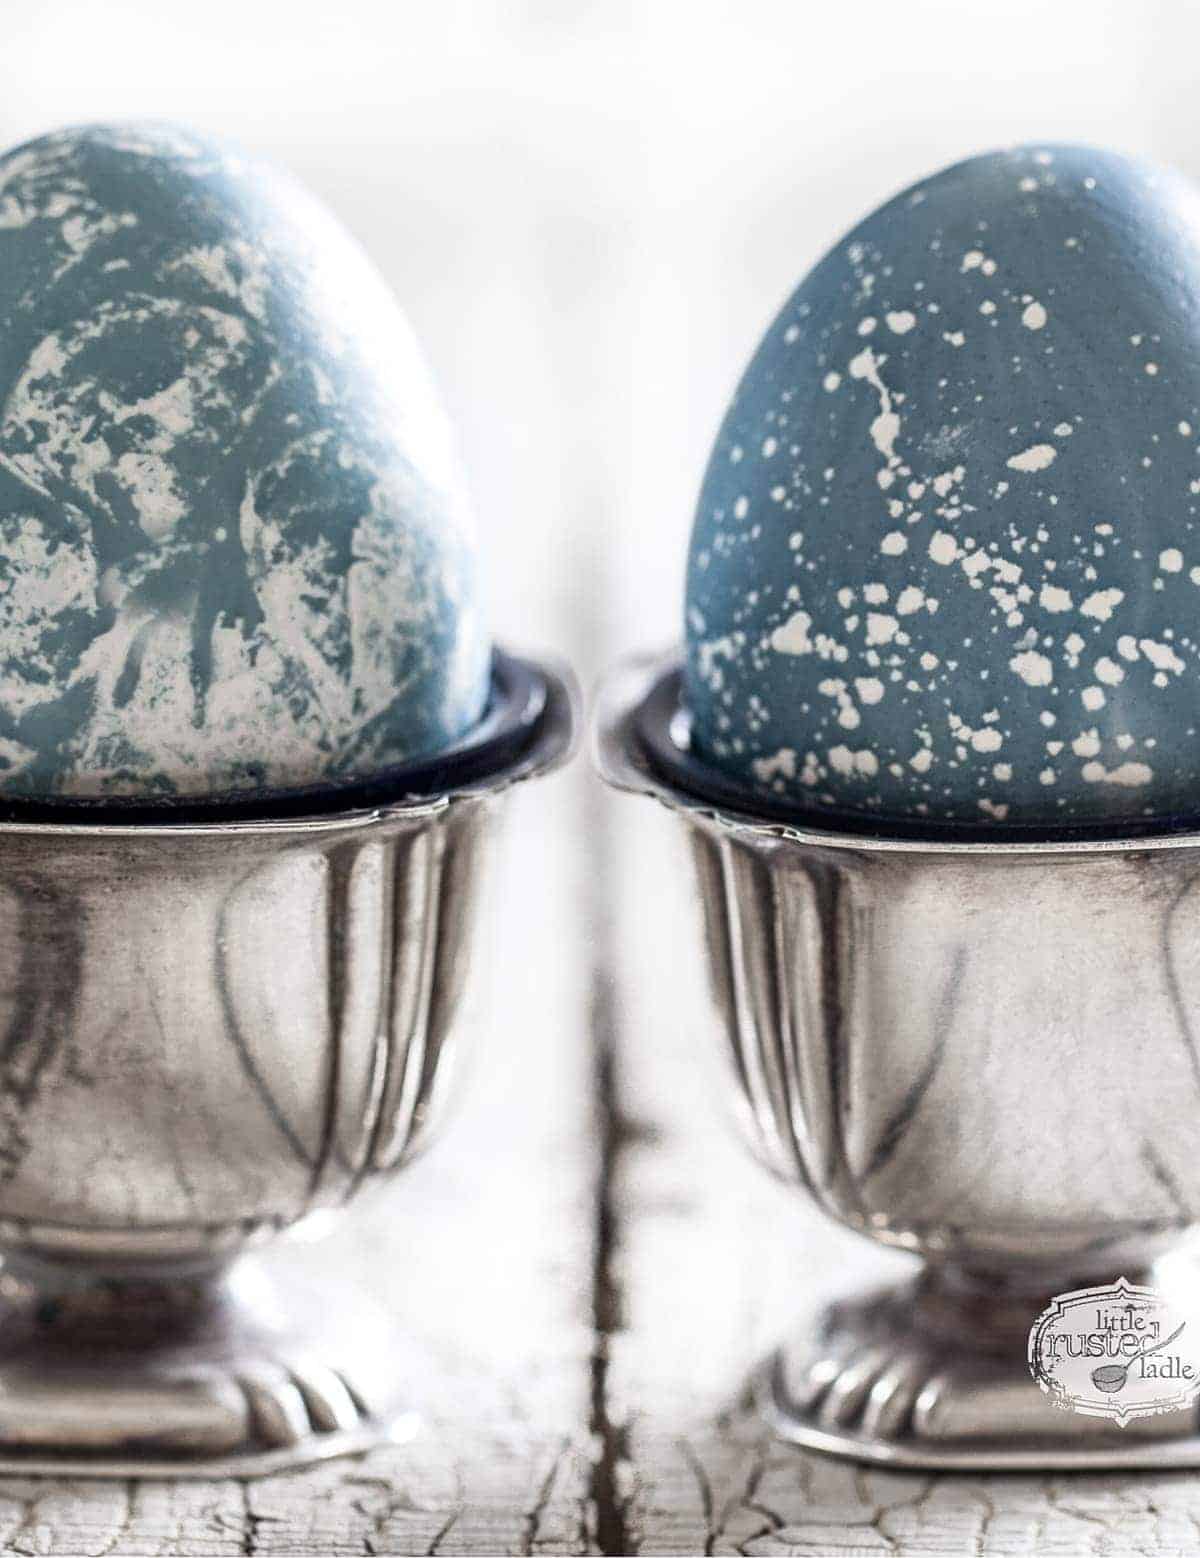 Little Rusted Ladle 10 96 WM - Jena Carlin Photography _Midwest Food Photographer - Natural Dye Blue Marble Easter Eggs-2